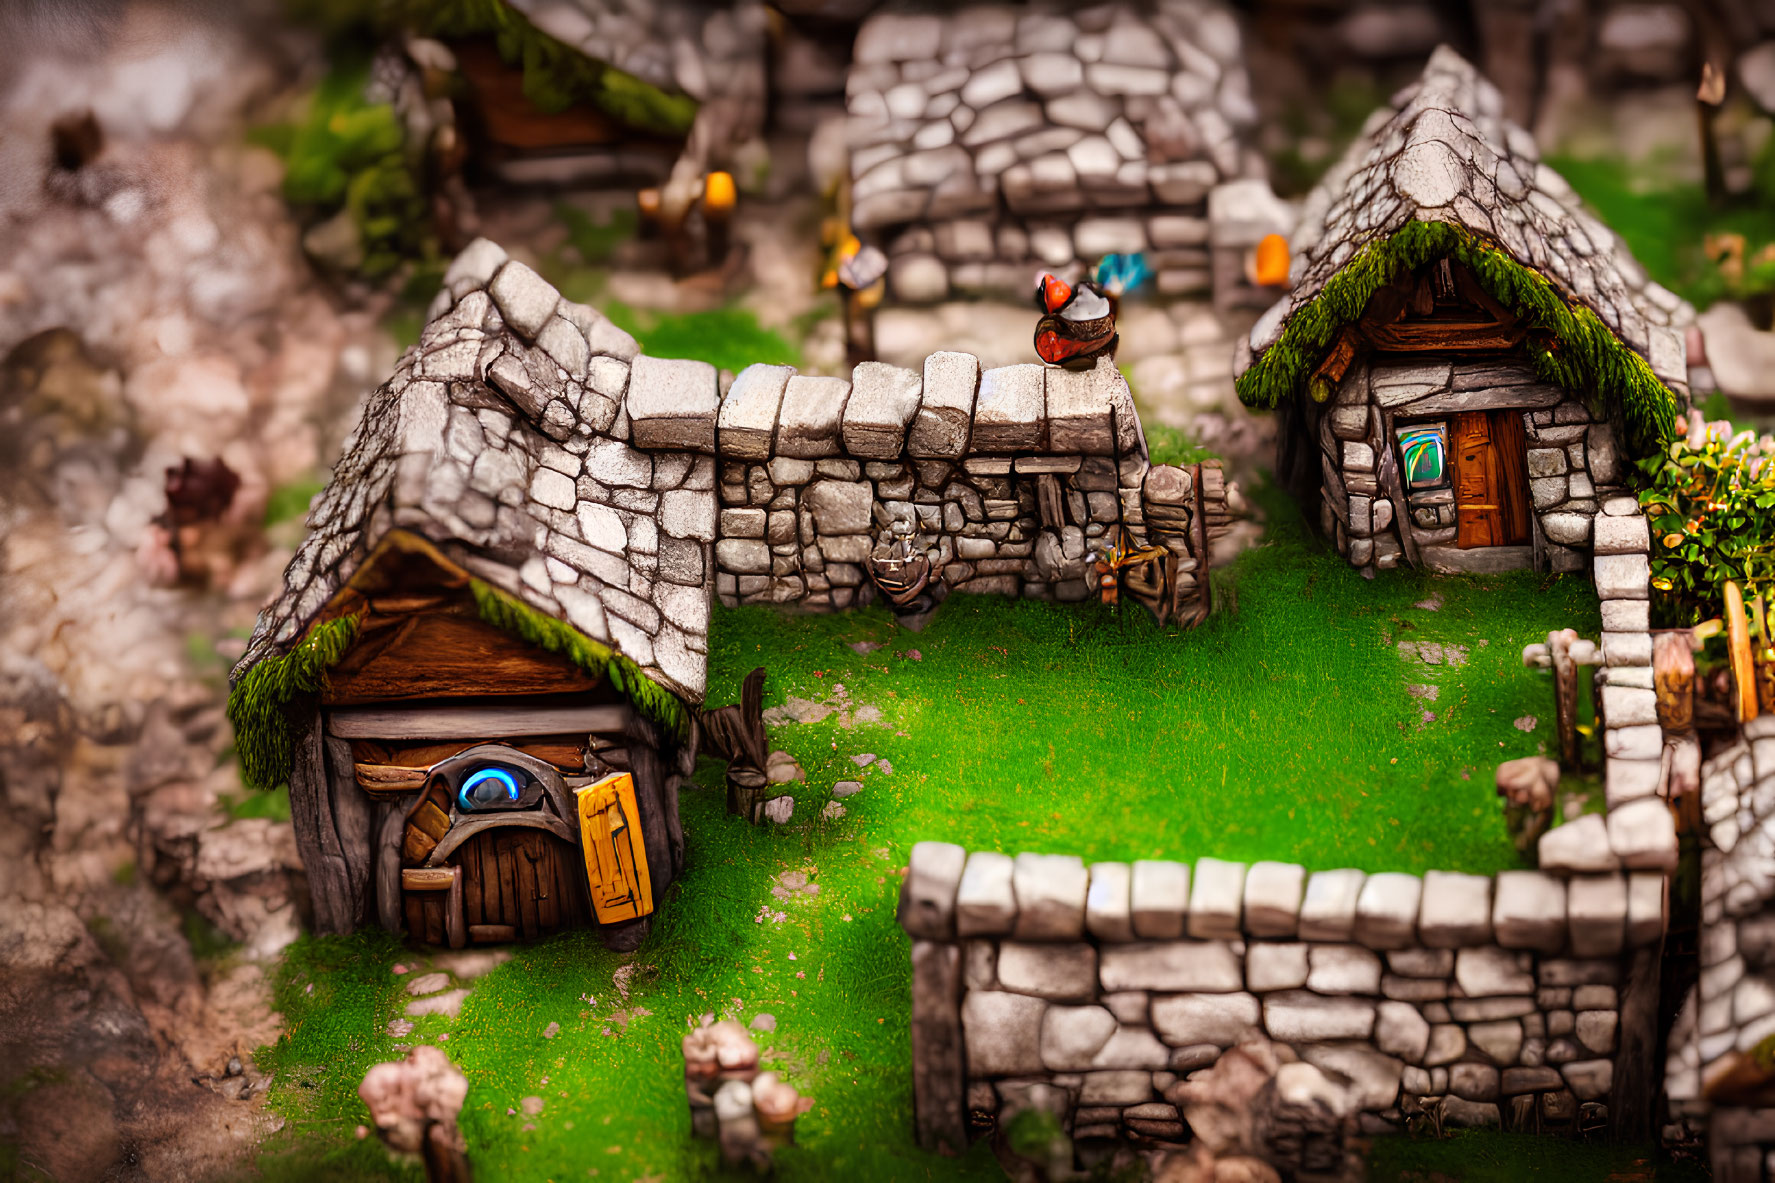 Detailed Stone Houses in Miniature Village Scene with Greenery and Small Figures